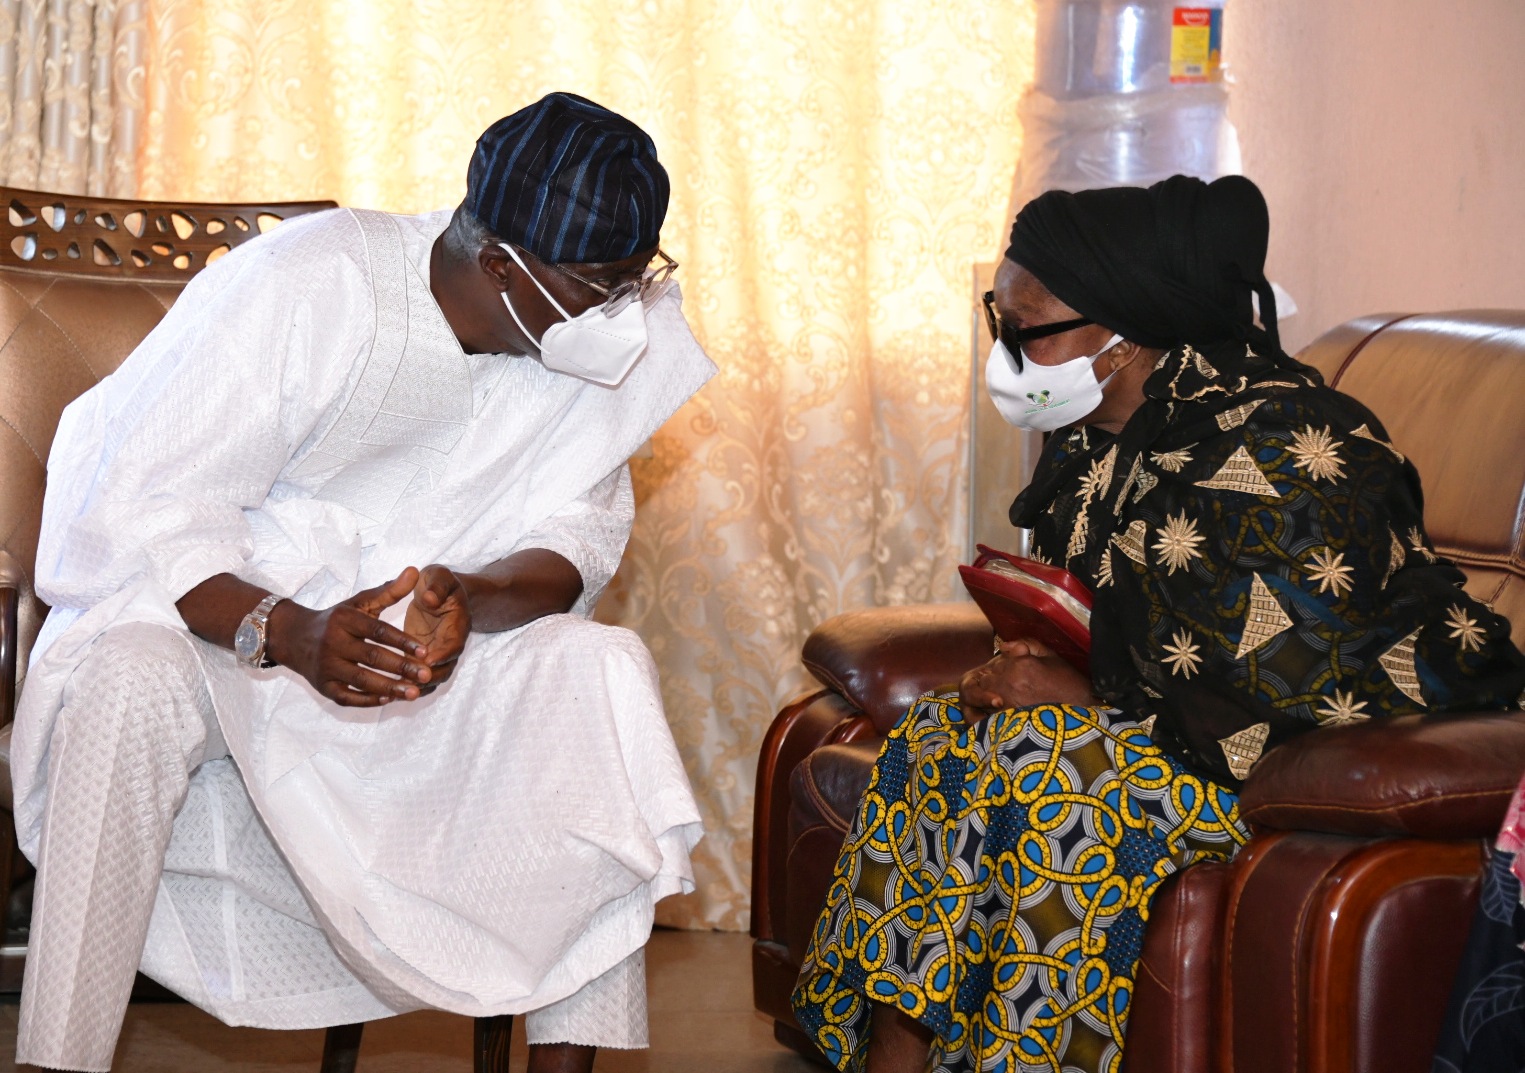  Lagos State Governor, Mr Babajide Sanwo-Olu (left), condoling with wife of the deceased, Mrs. Jumoke Rasak during a condolence visit to the family of late Chief Lanre Razak, on Sunday, August 16, 2020.